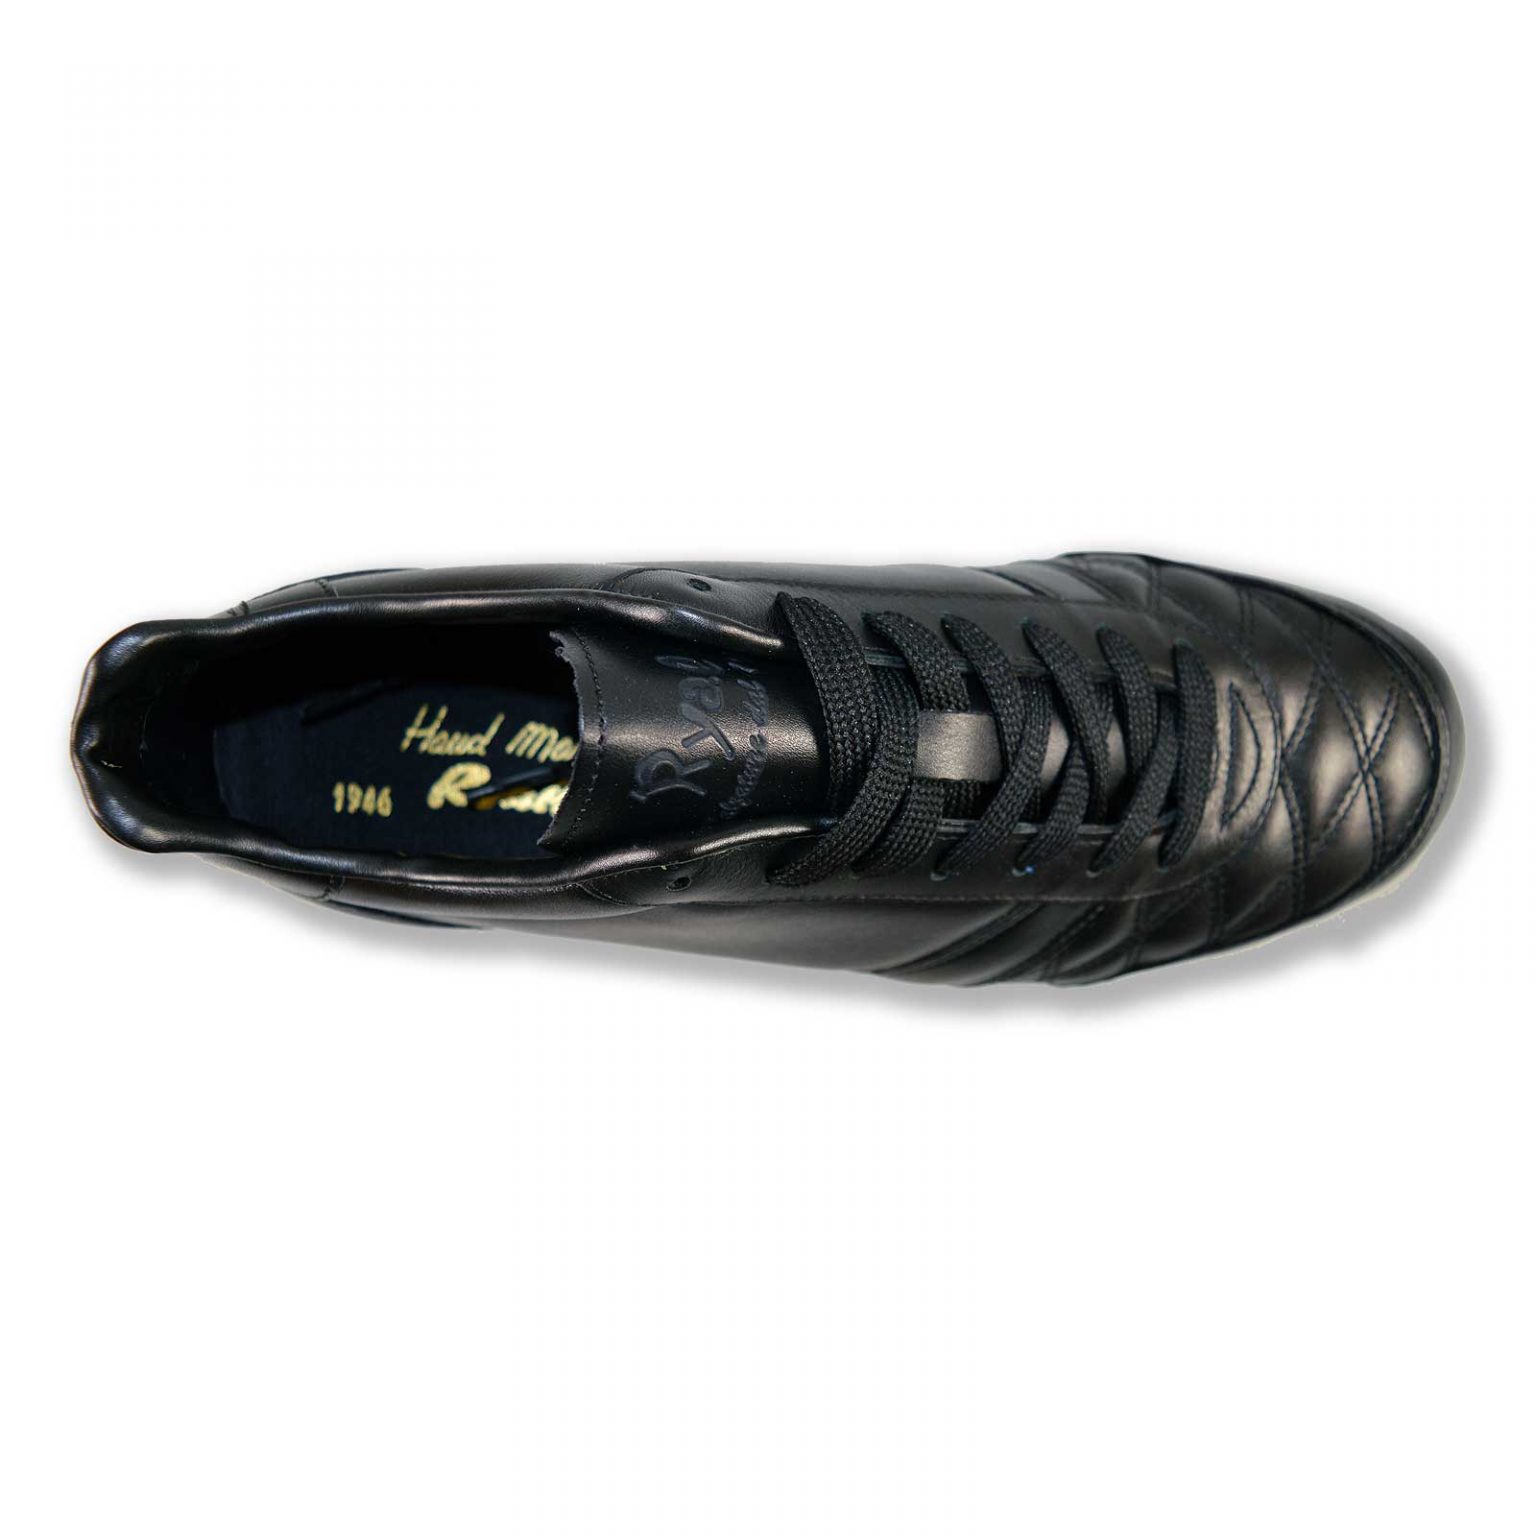 Mundial ( Toe Cup / with protective toe cup )FG/MG - Ryal-Shop